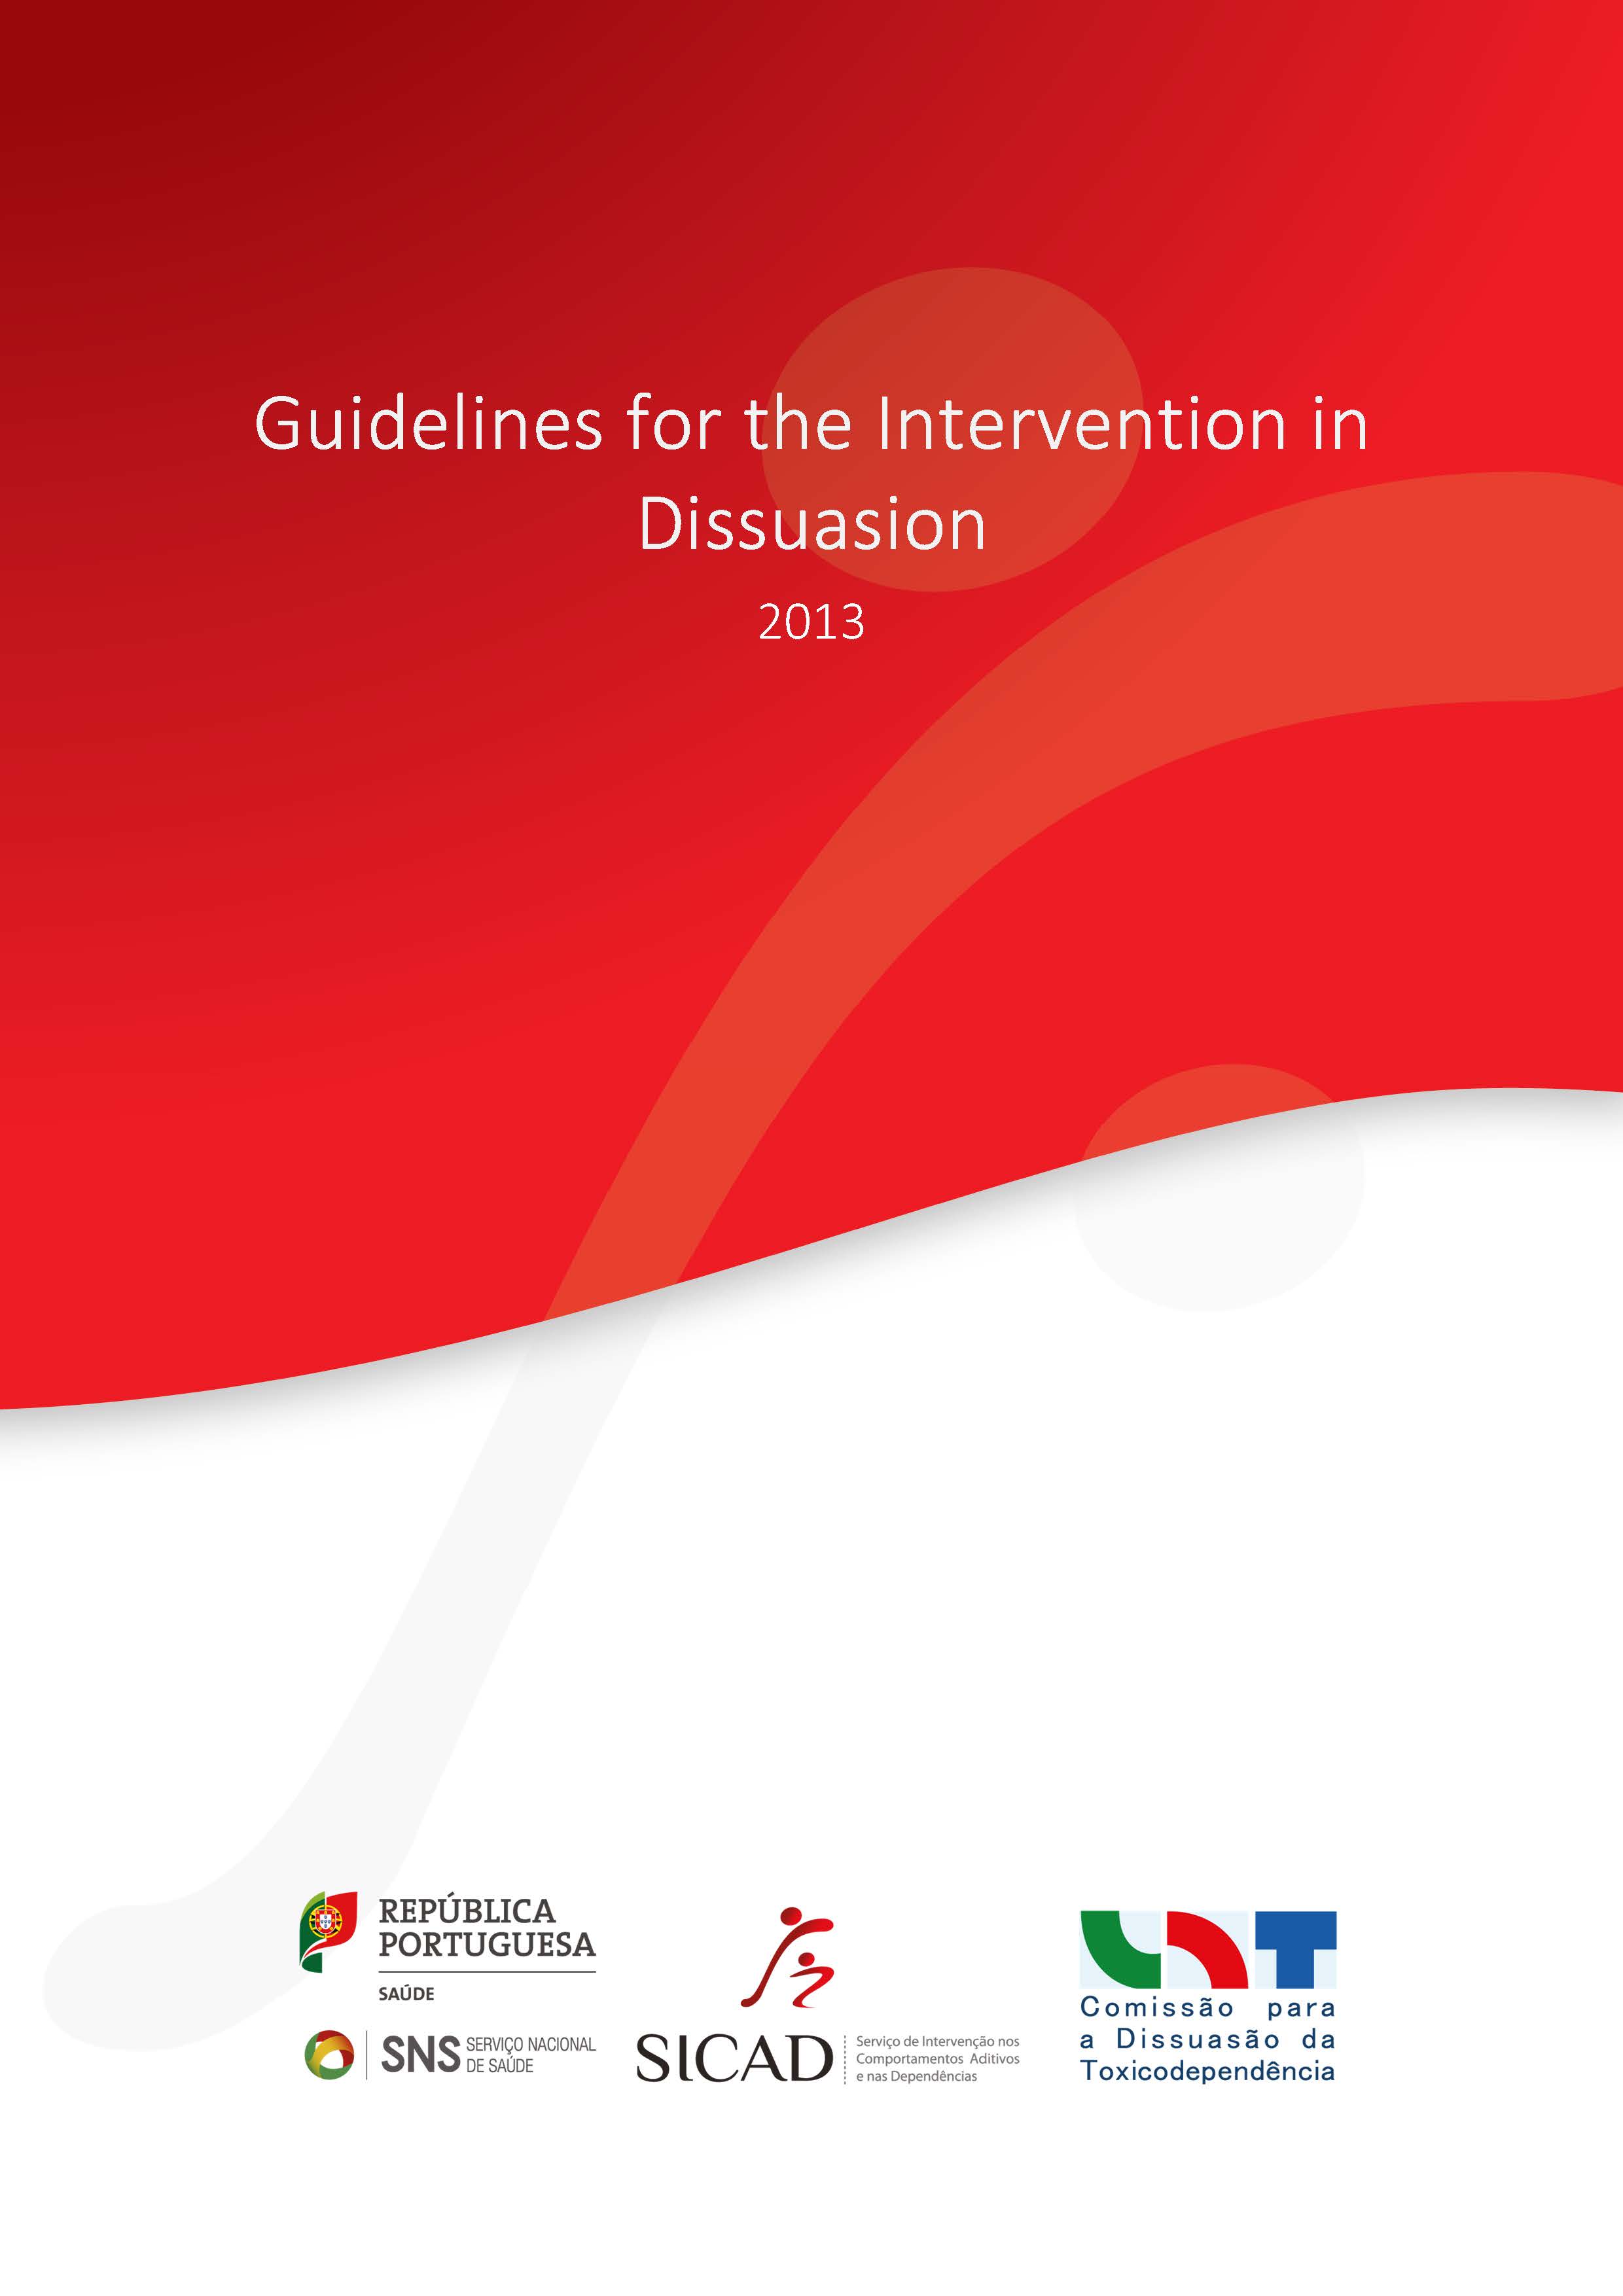 image of the publications Guidelines for the intervention in dissuasion